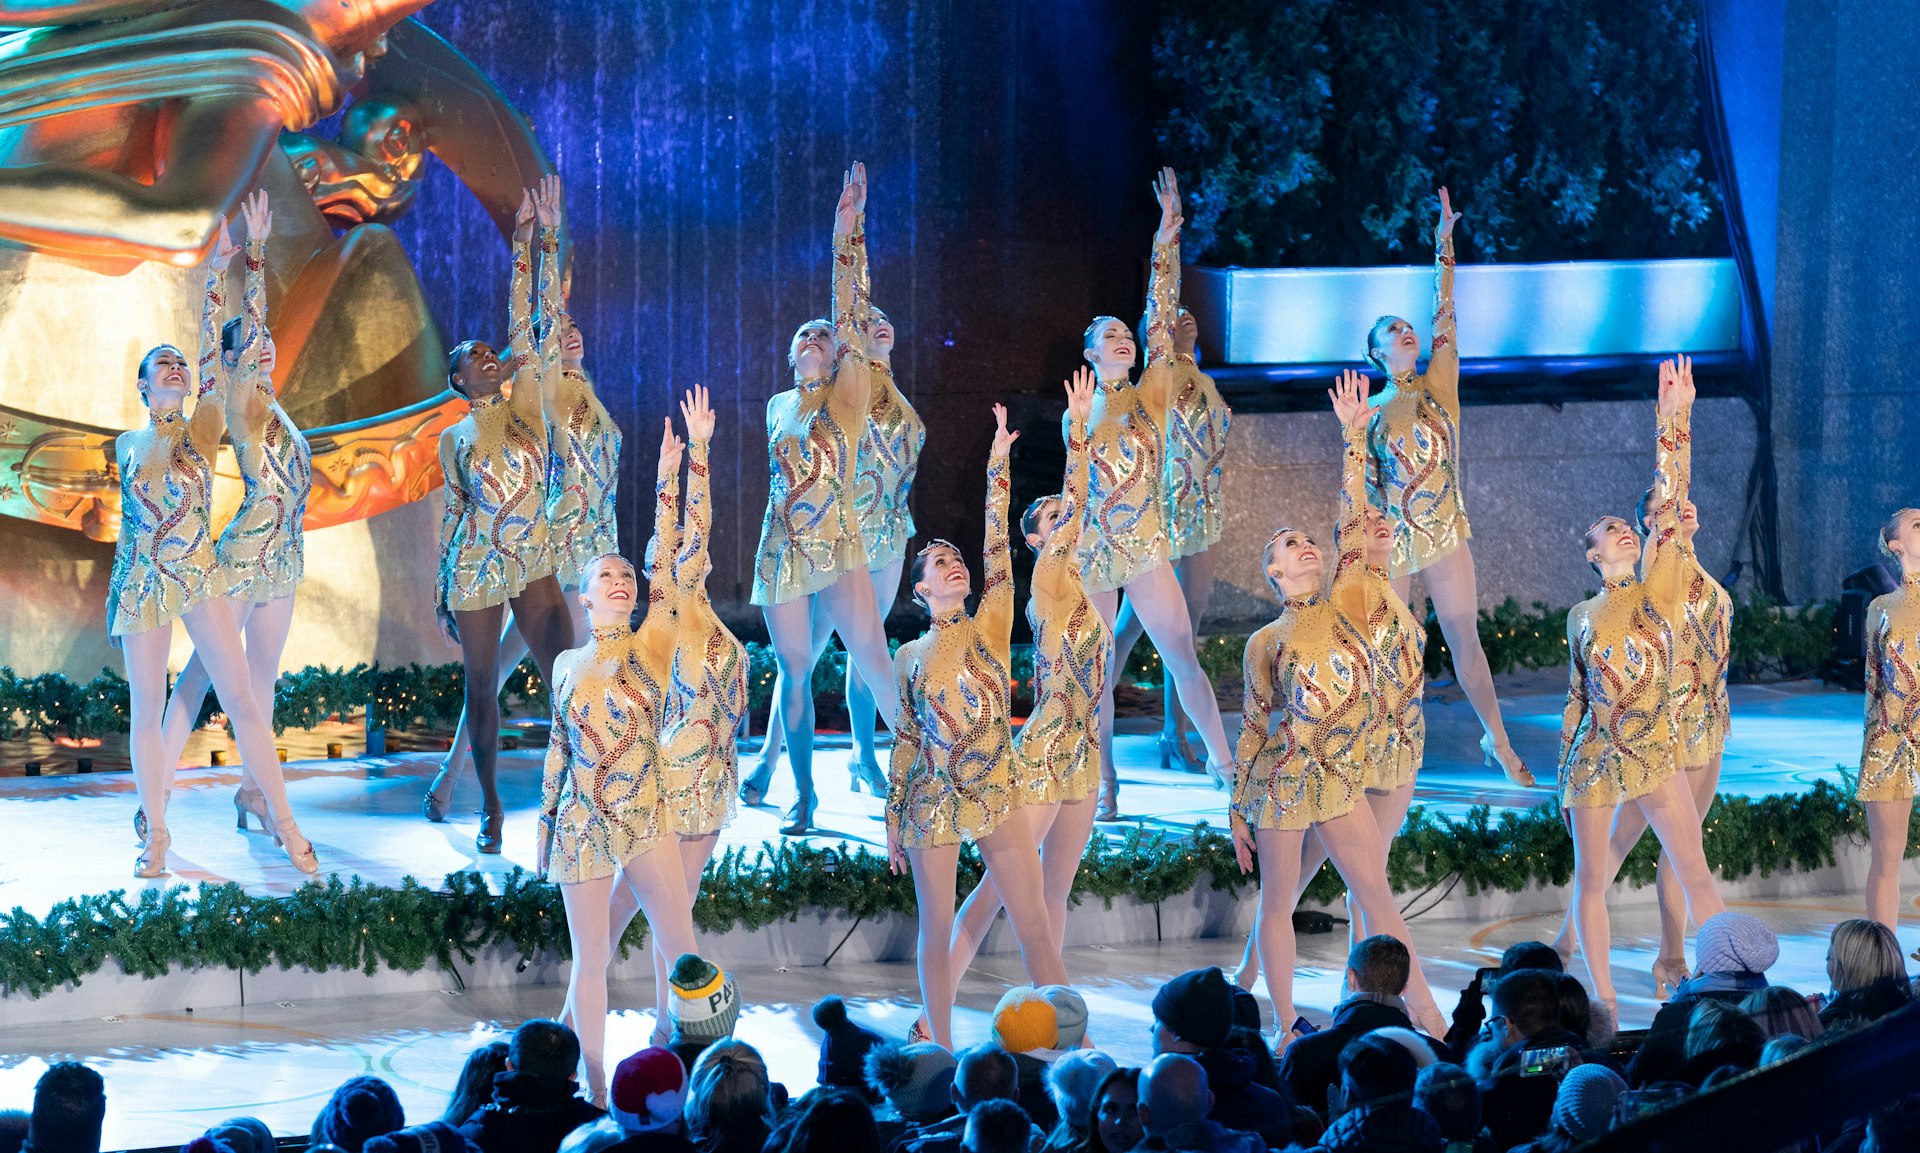 Radio City's Rockettes performing in sparkly costumes